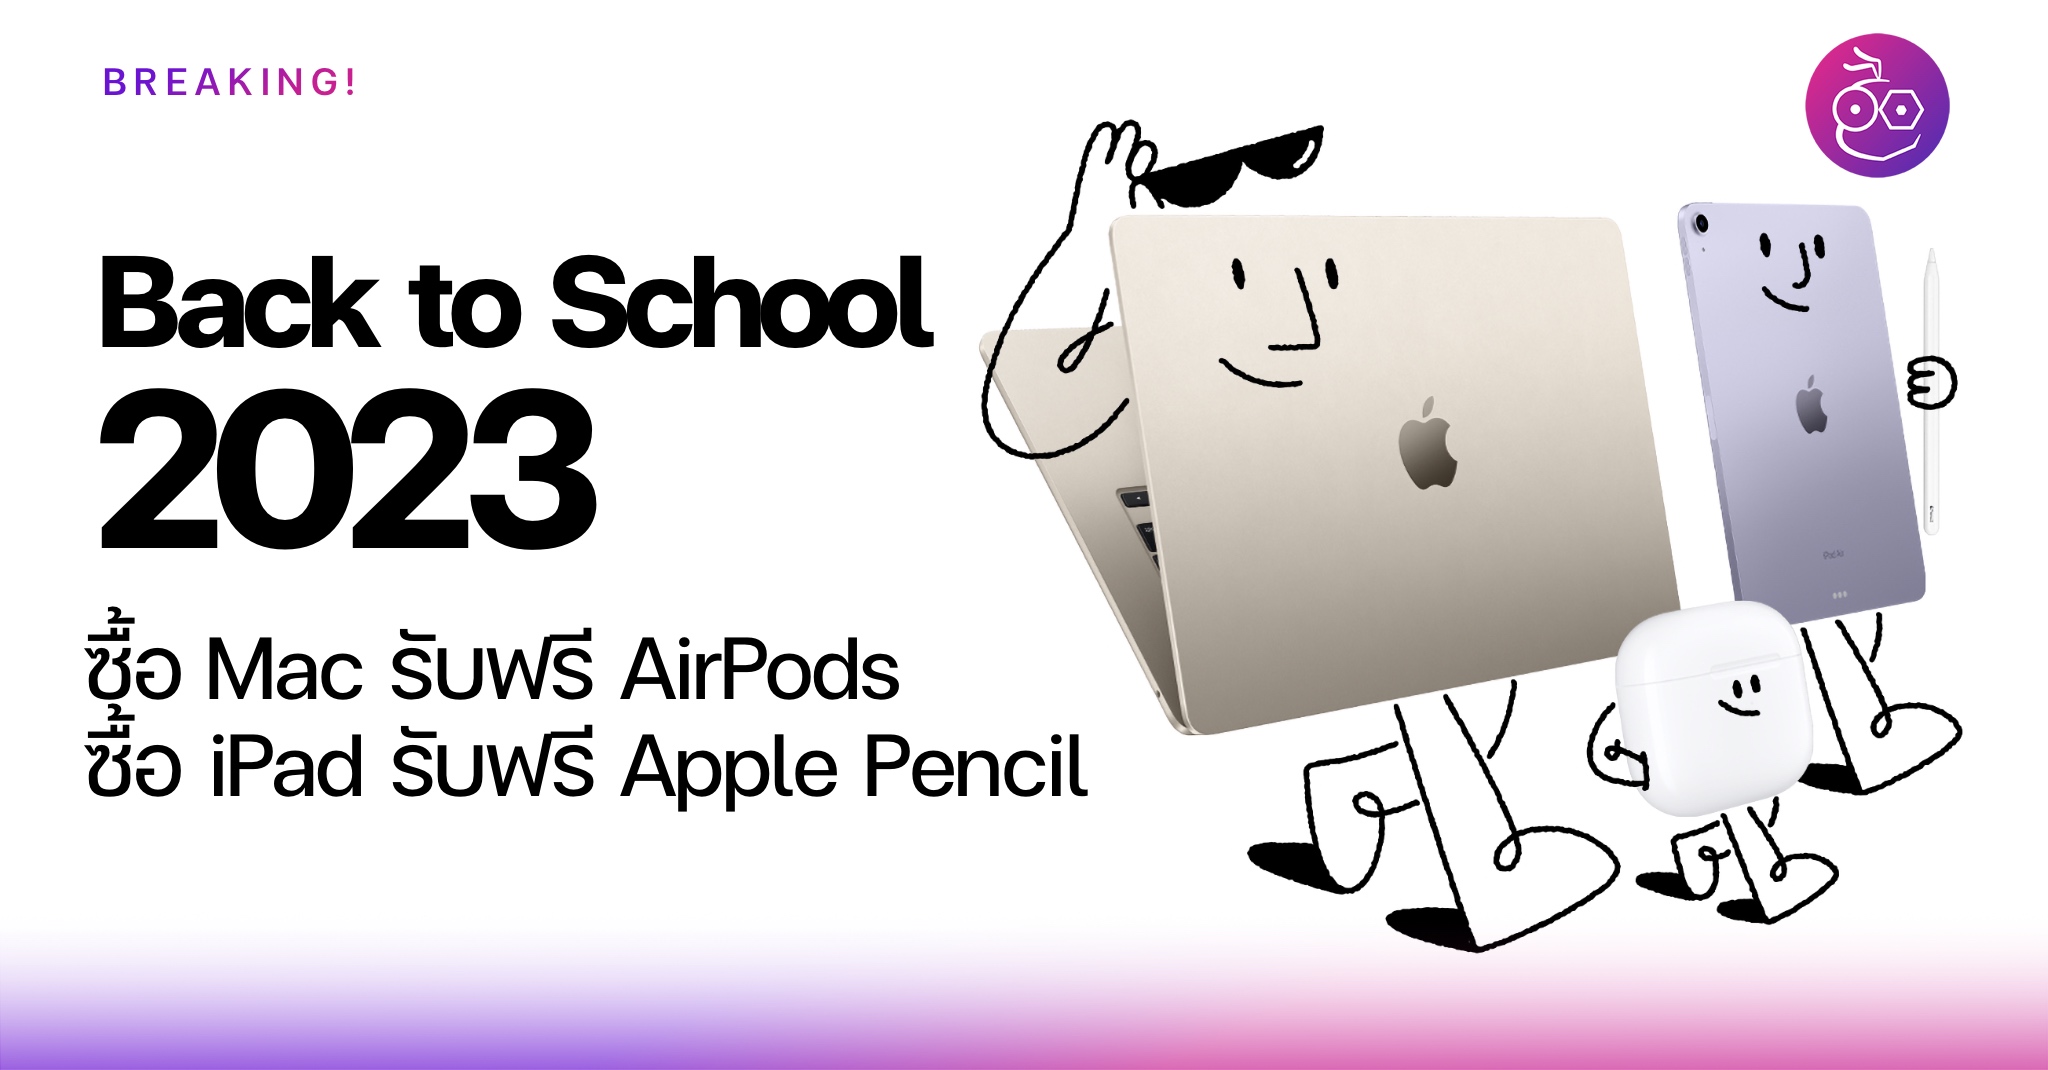 Apple's Back to School 2023 Campaign Buy Mac Free AirPods, Buy iPad